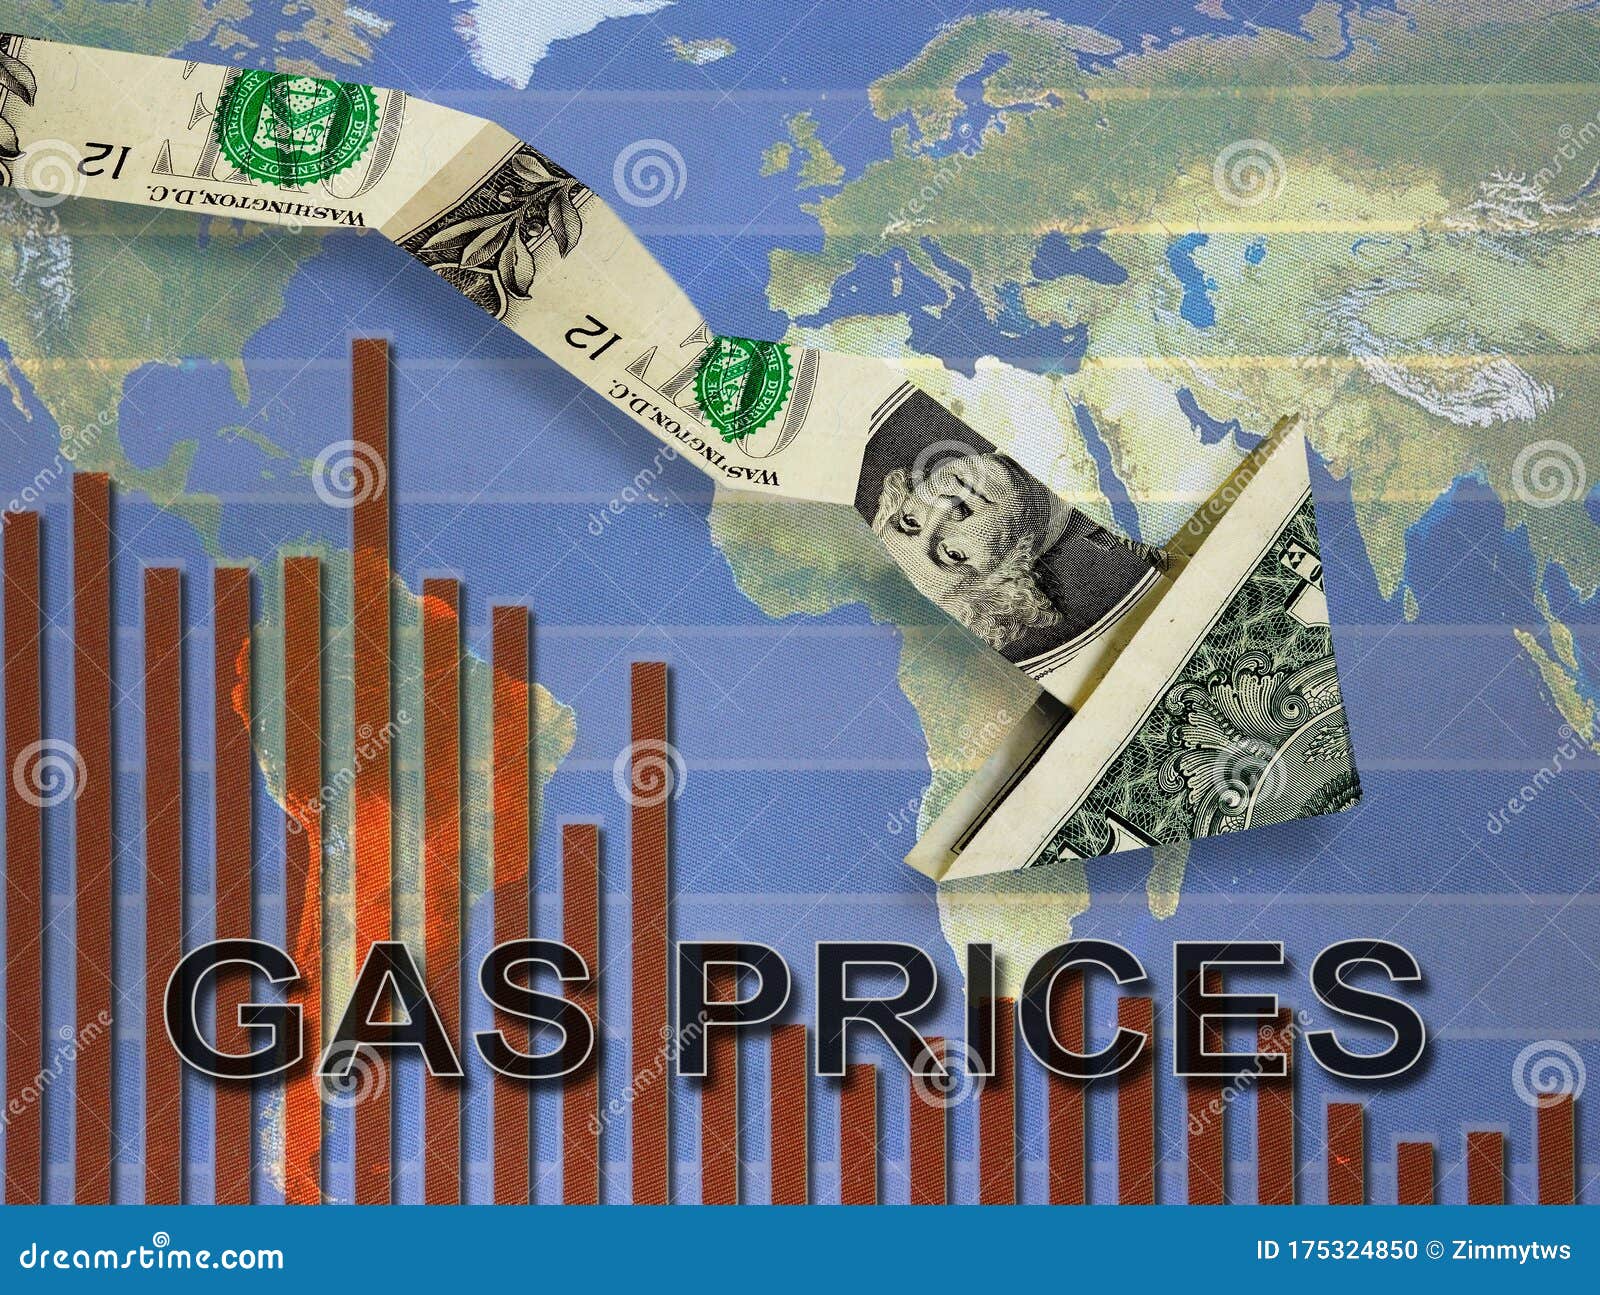 falling gas prices chart and map